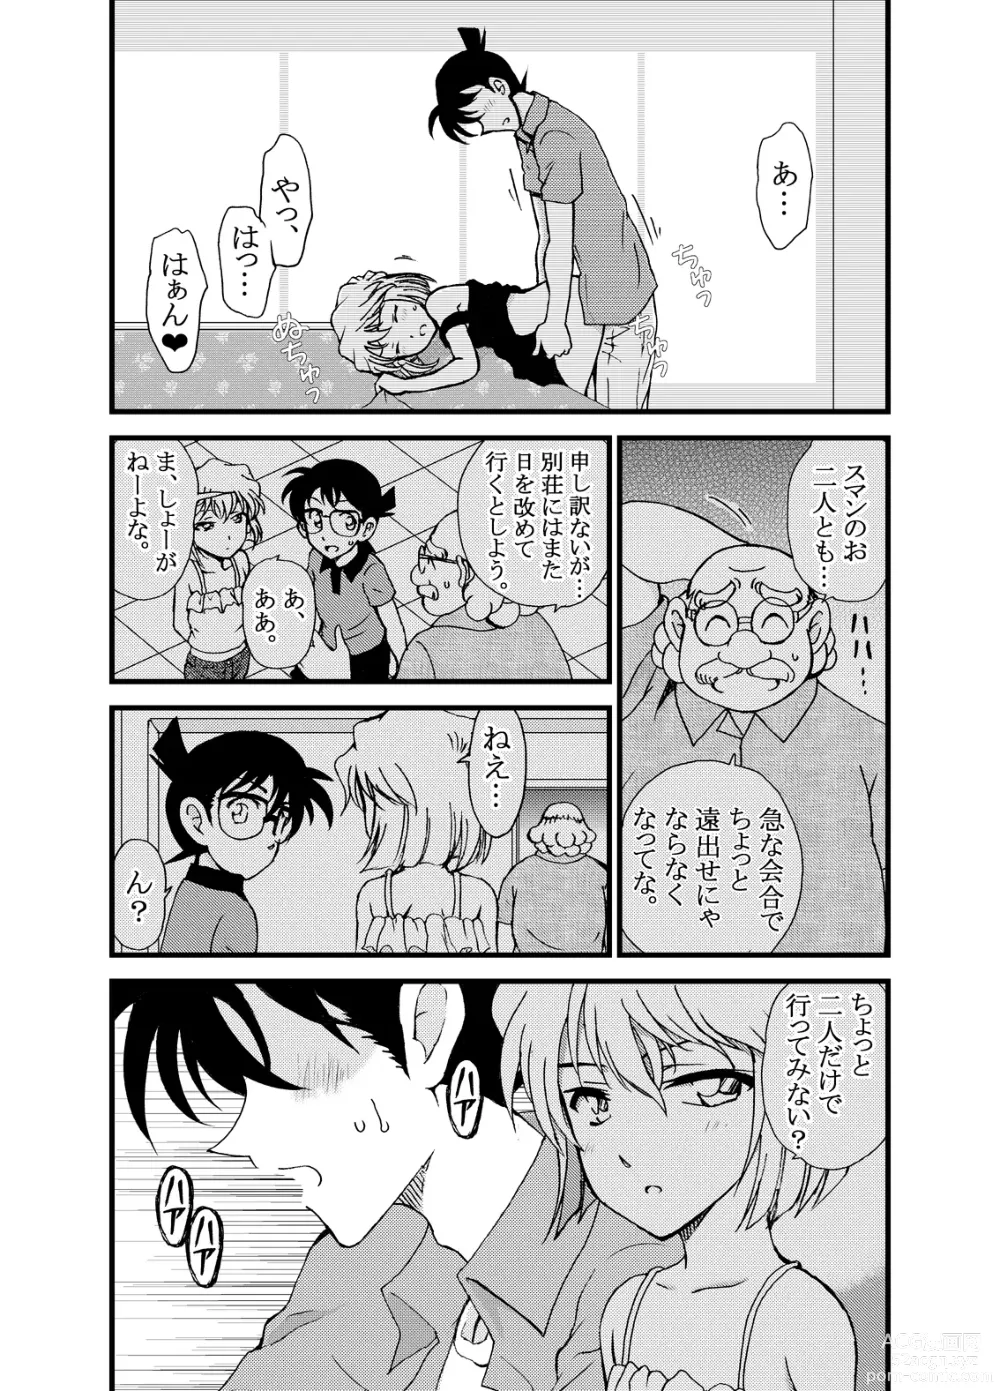 Page 14 of doujinshi Summer Resort Preview